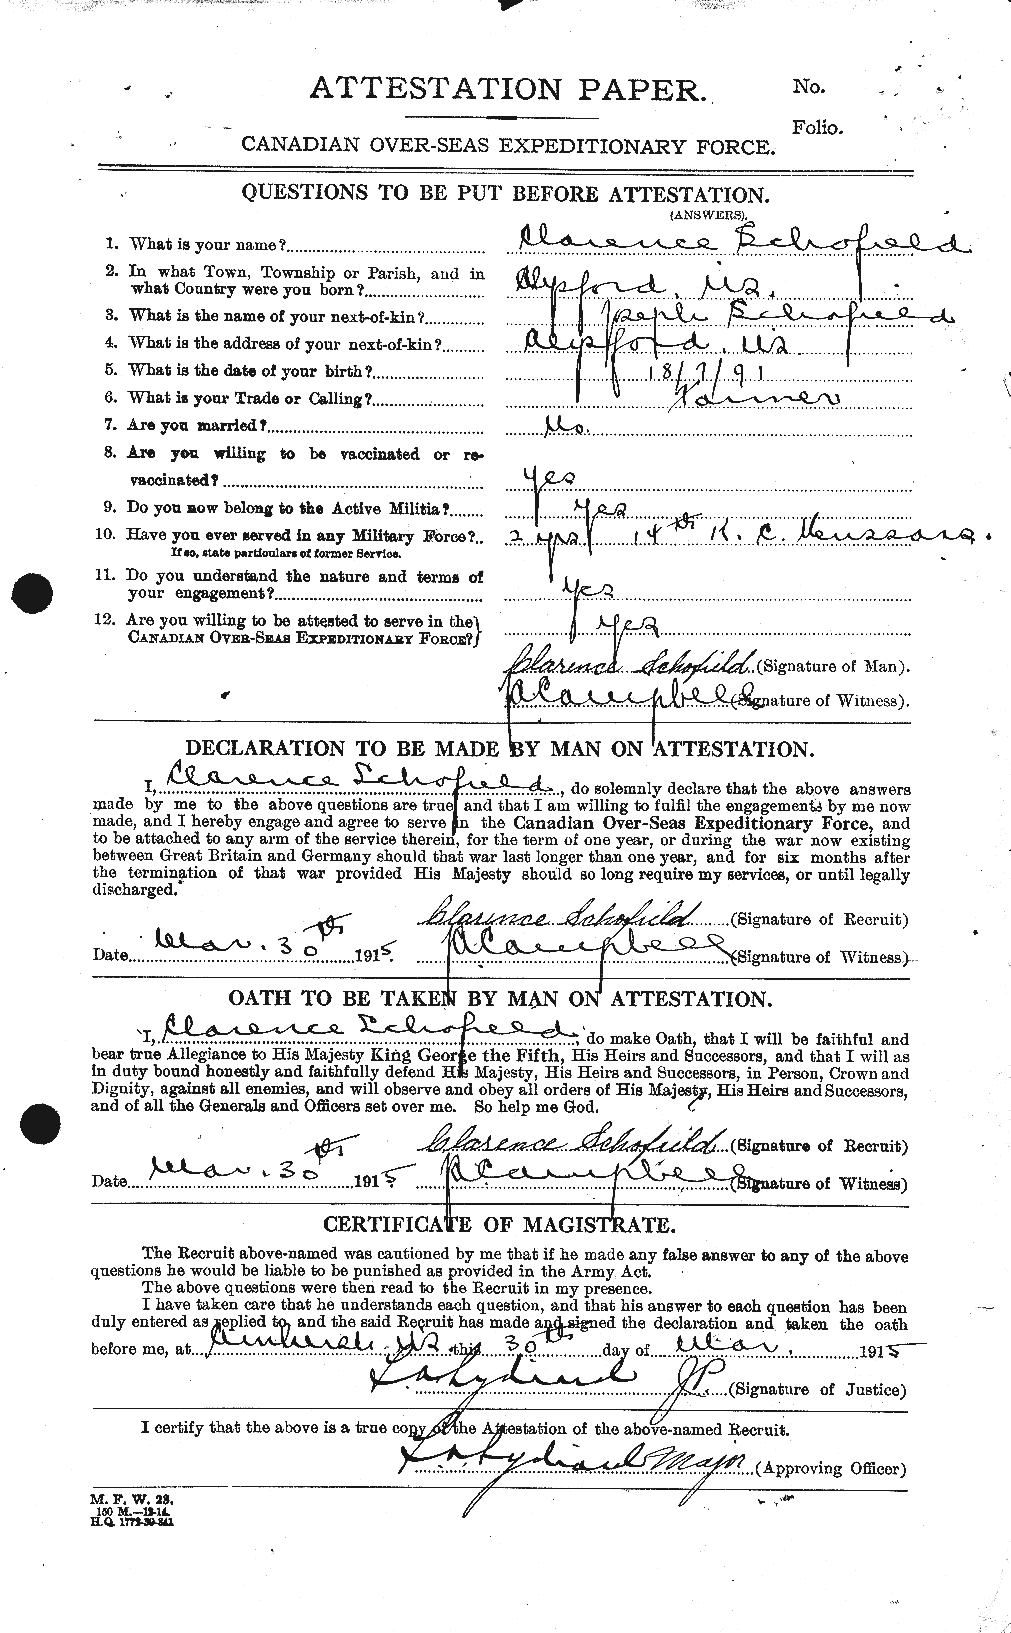 Personnel Records of the First World War - CEF 082214a